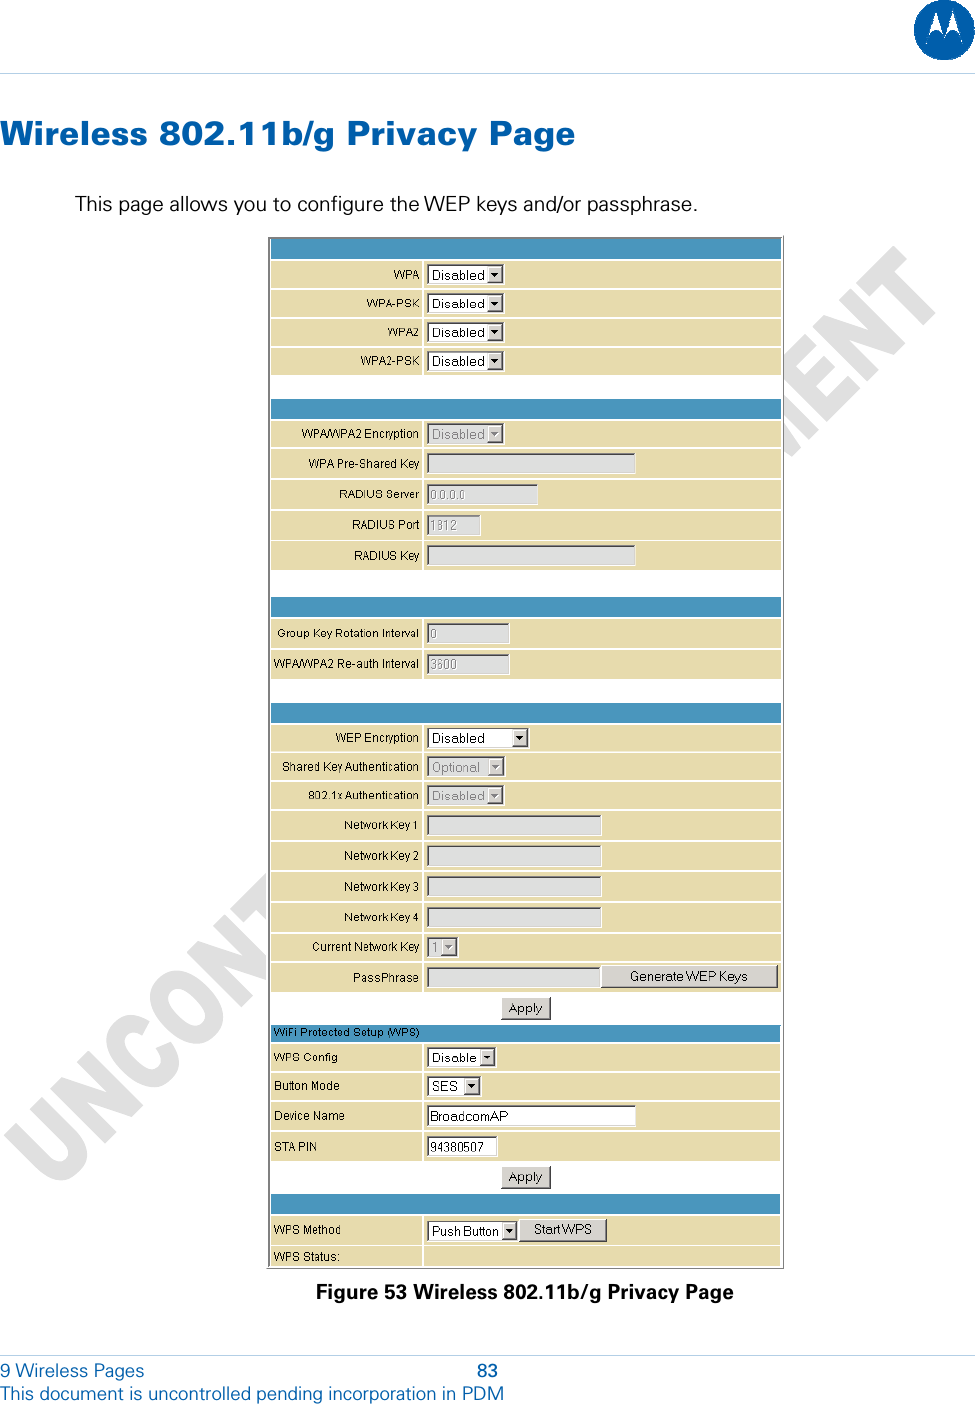  Wireless 802.11b/g Privacy Page This page allows you to configure the WEP keys and/or passphrase.  Figure 53 Wireless 802.11b/g Privacy Page 9 Wireless Pages  83 This document is uncontrolled pending incorporation in PDM  